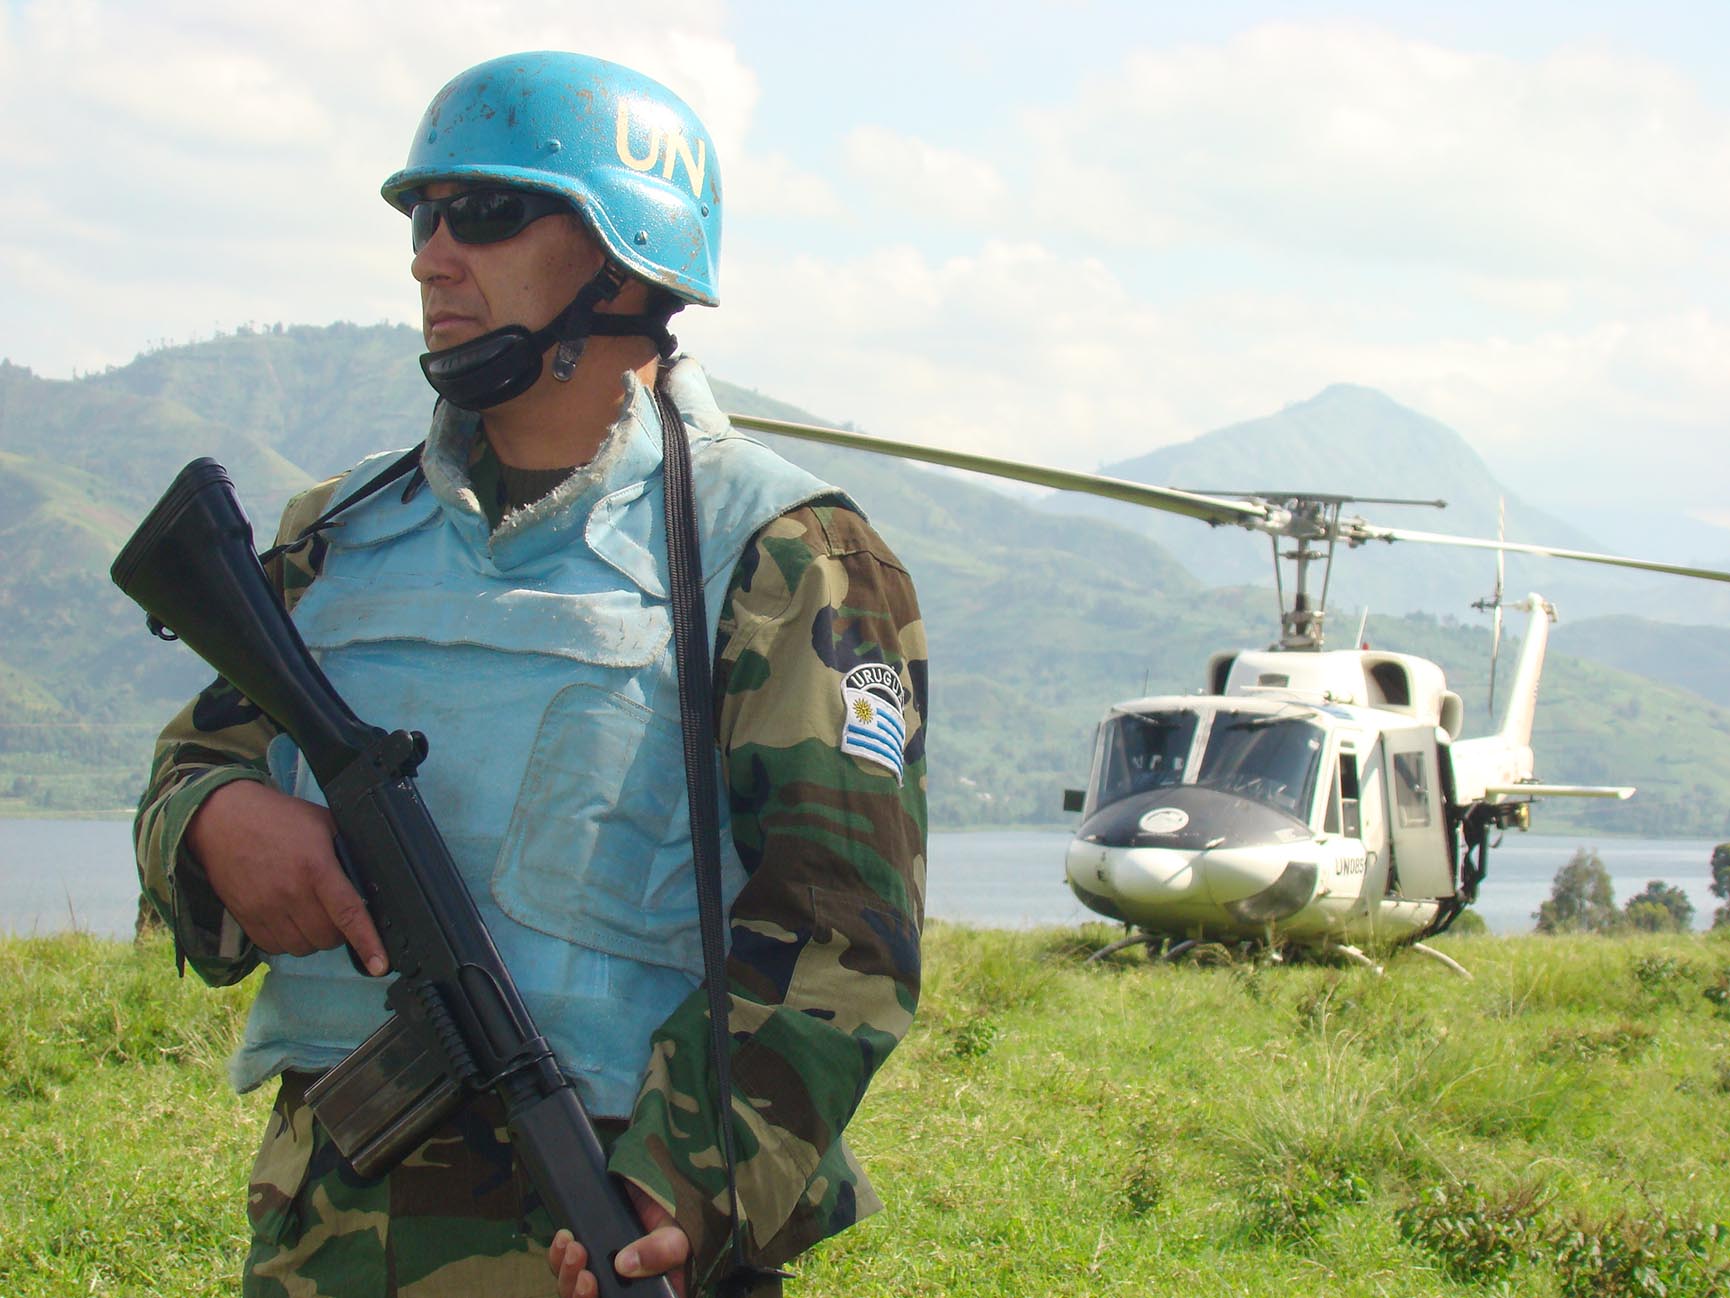 Join UN Peacekeepers on the Ground in Congo in This Virtual Reality Experience